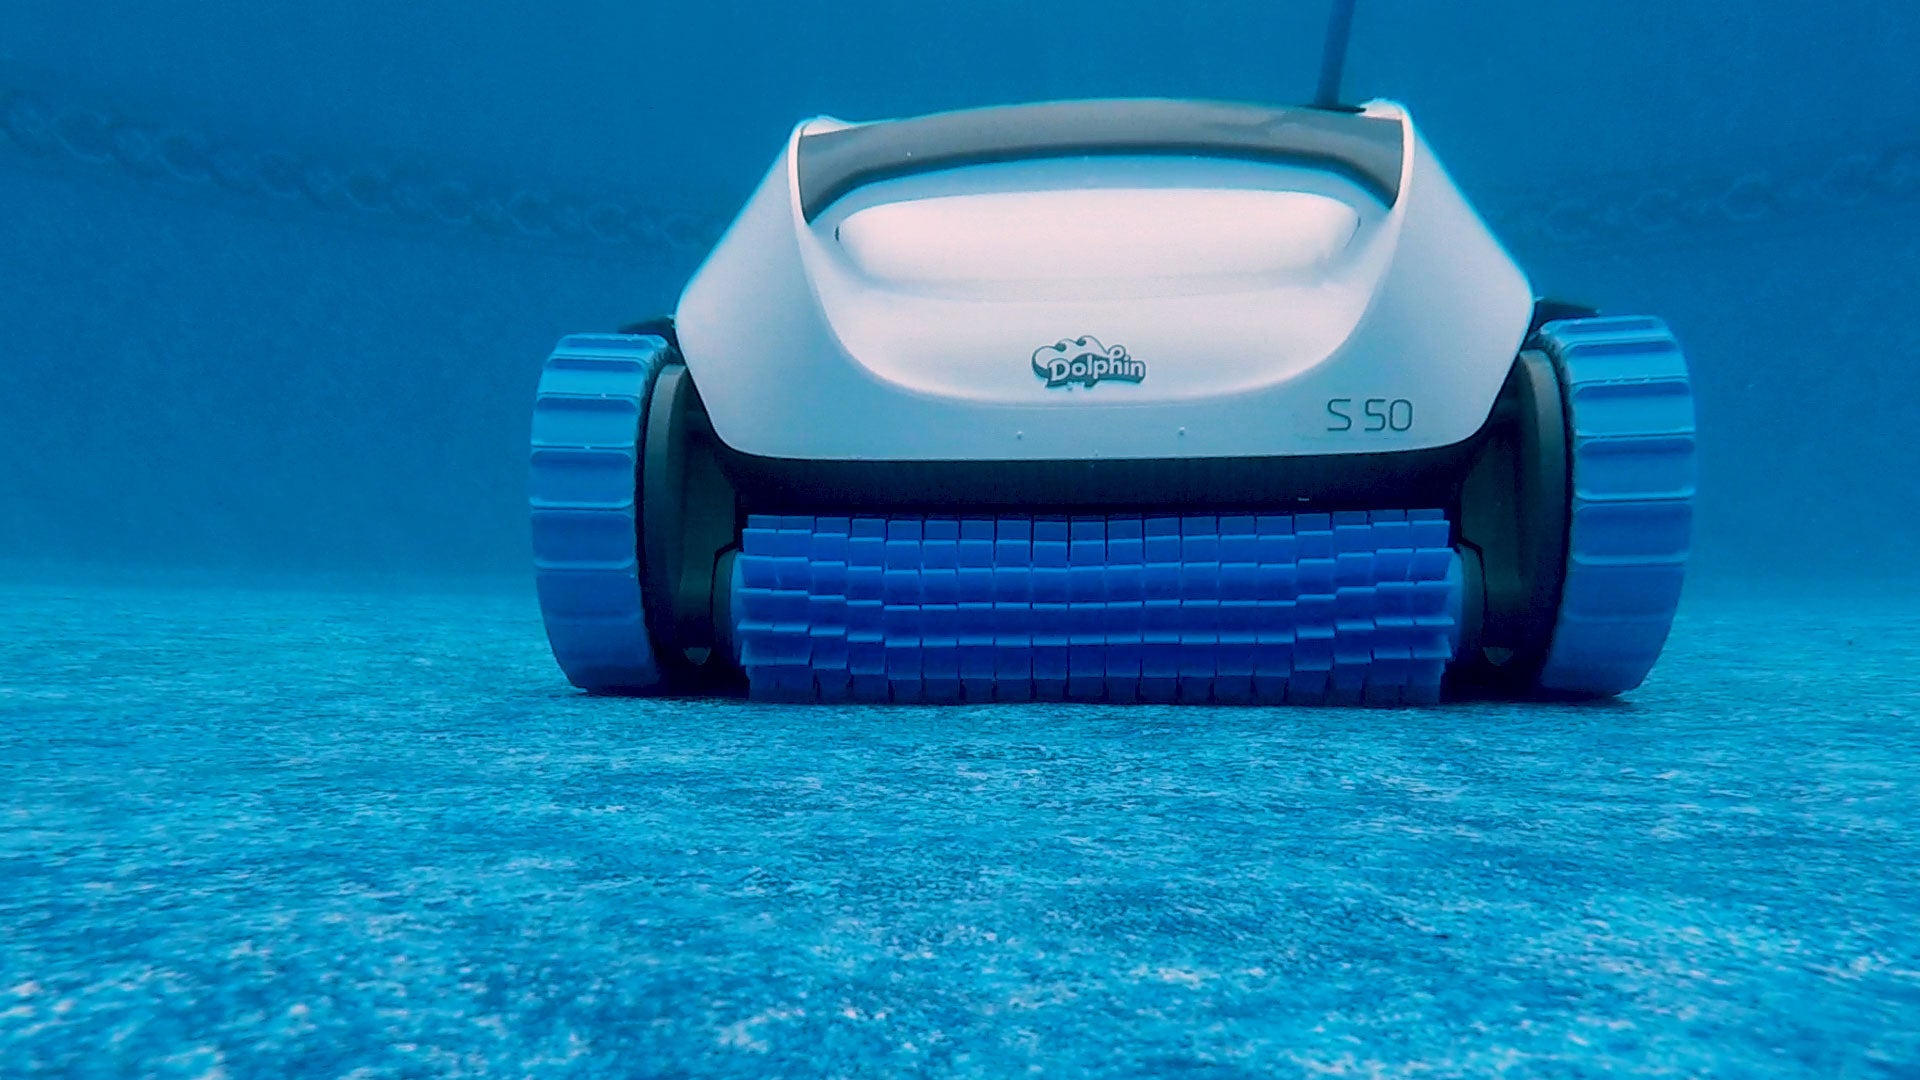 Dolphin S50 Robotic Pool Cleaner - IN STORE PICK UP ONLY - Poolstoreconnect